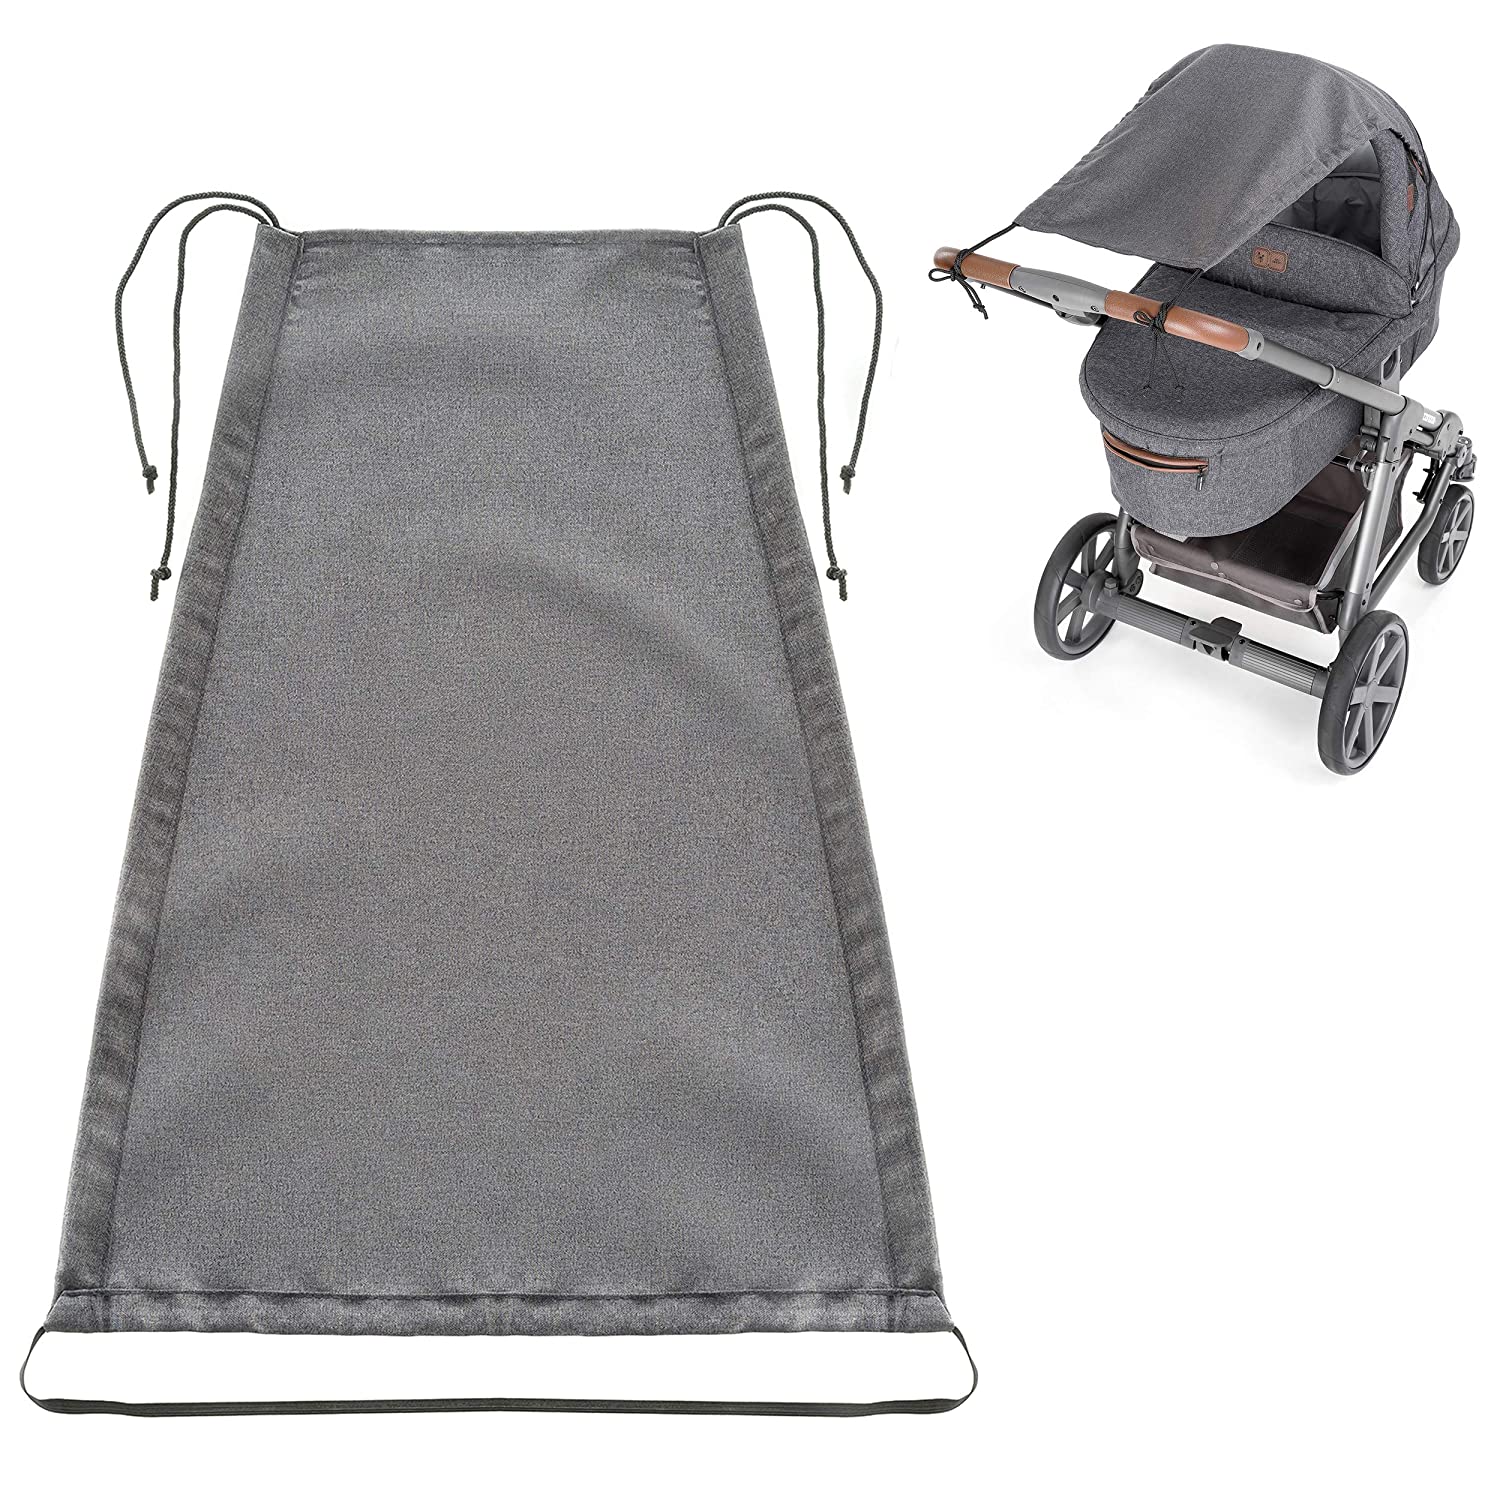 Zamboo Universal deluxe sun sail for pram / baby tub, tear-proof, sun protection with UV protection coating, 50+ and roller blinds function, melange grey.